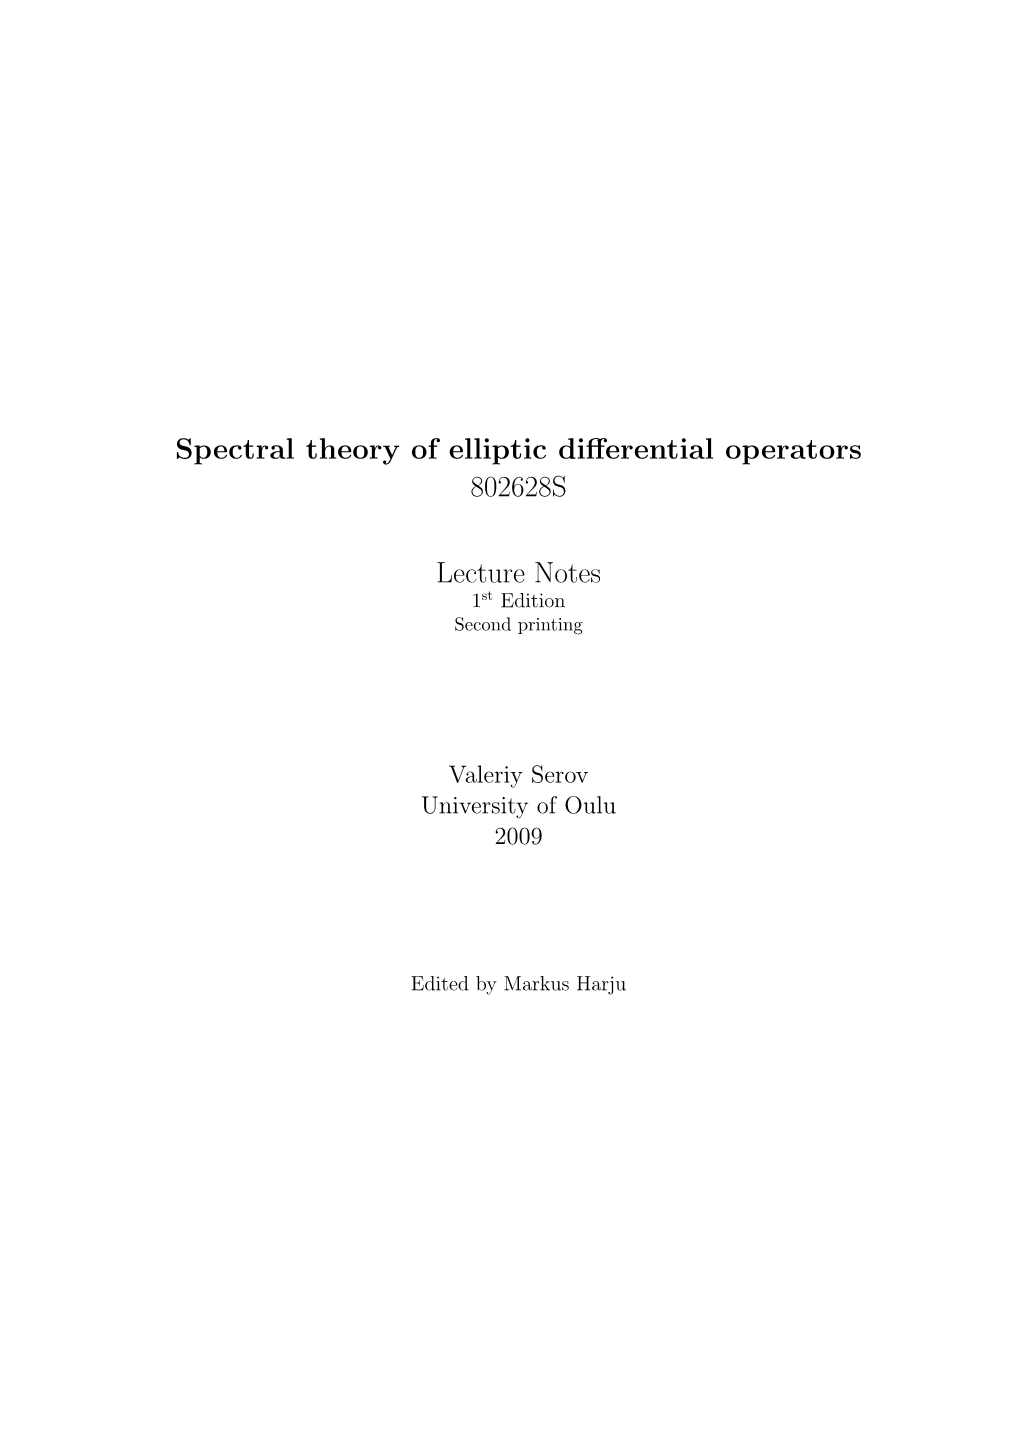 Spectral Theory of Elliptic Differential Operators